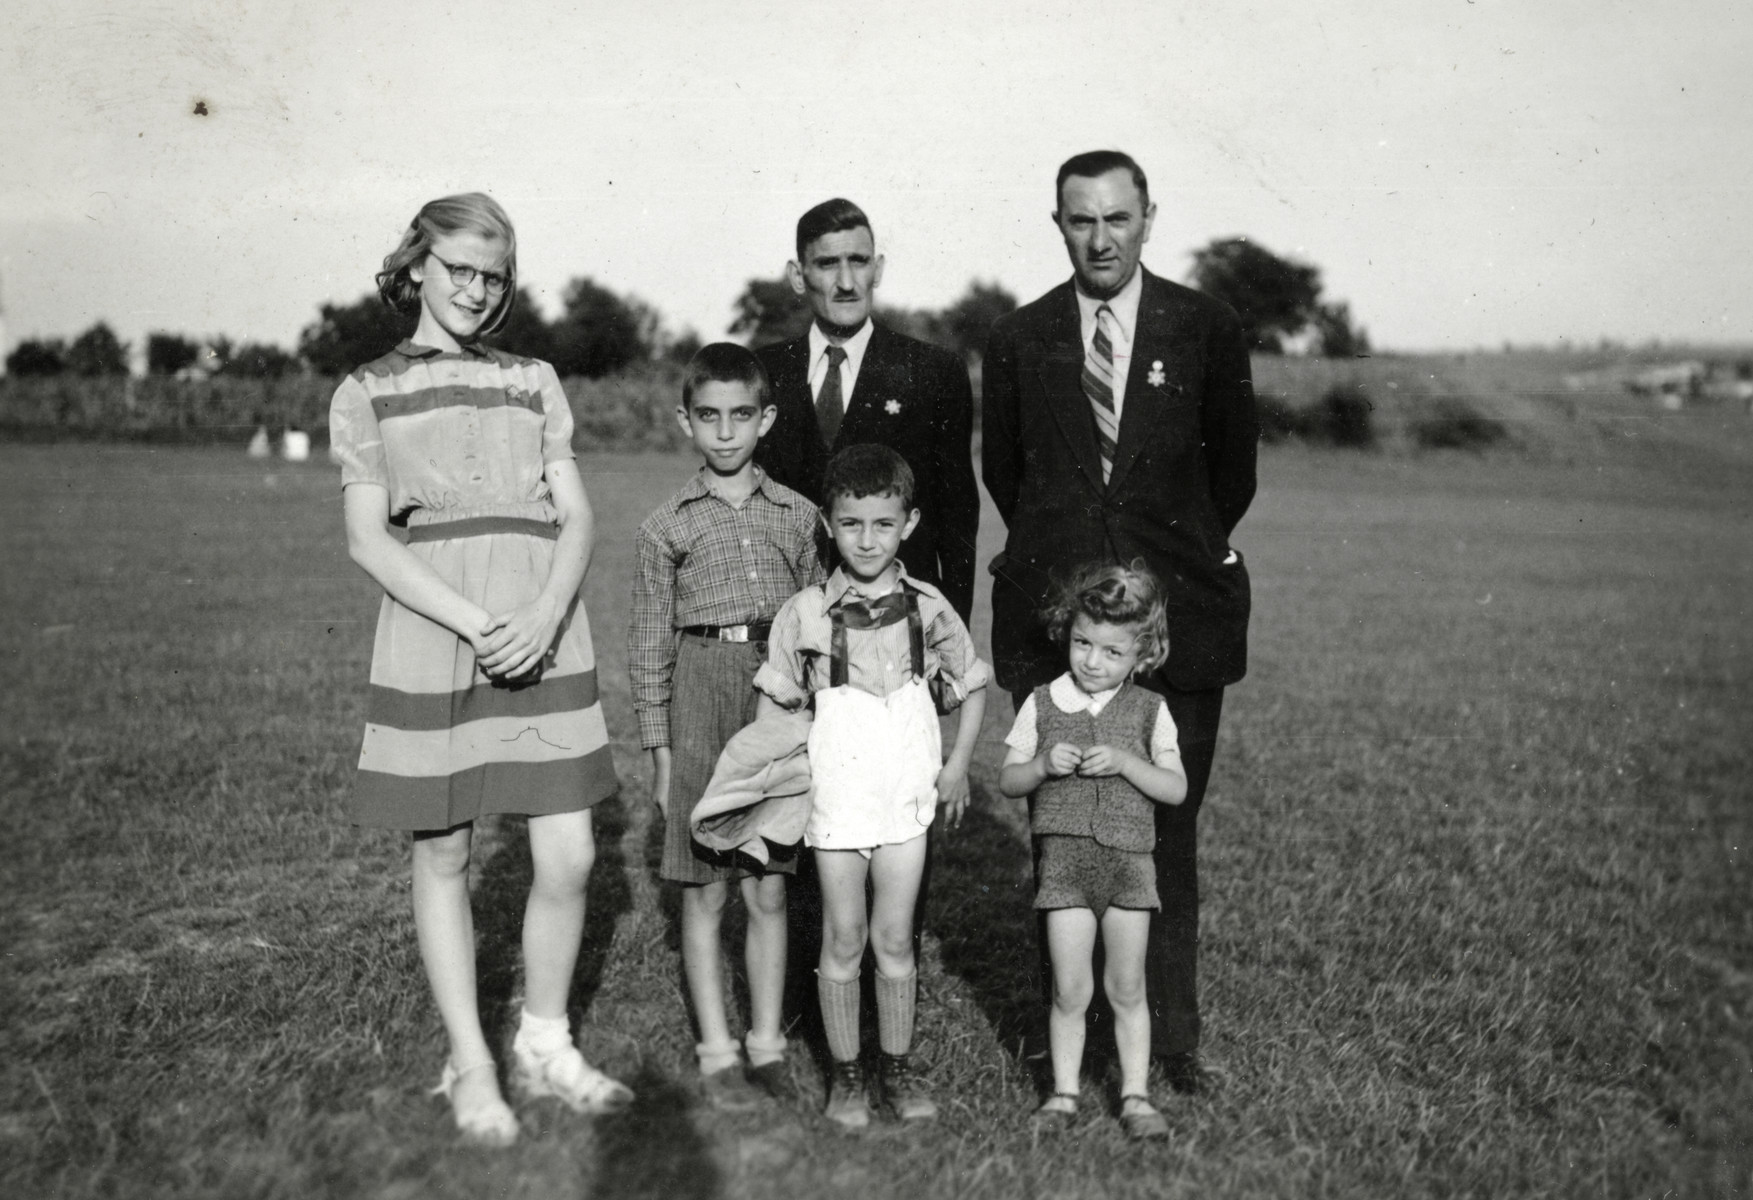 A Jewish family poses in Haskovo where they had been expelled.  The adults are wearing Jewish stars.

From left to right are Reine Behar, her father Rachamin Behar, and Nissim Alvas with his three children.